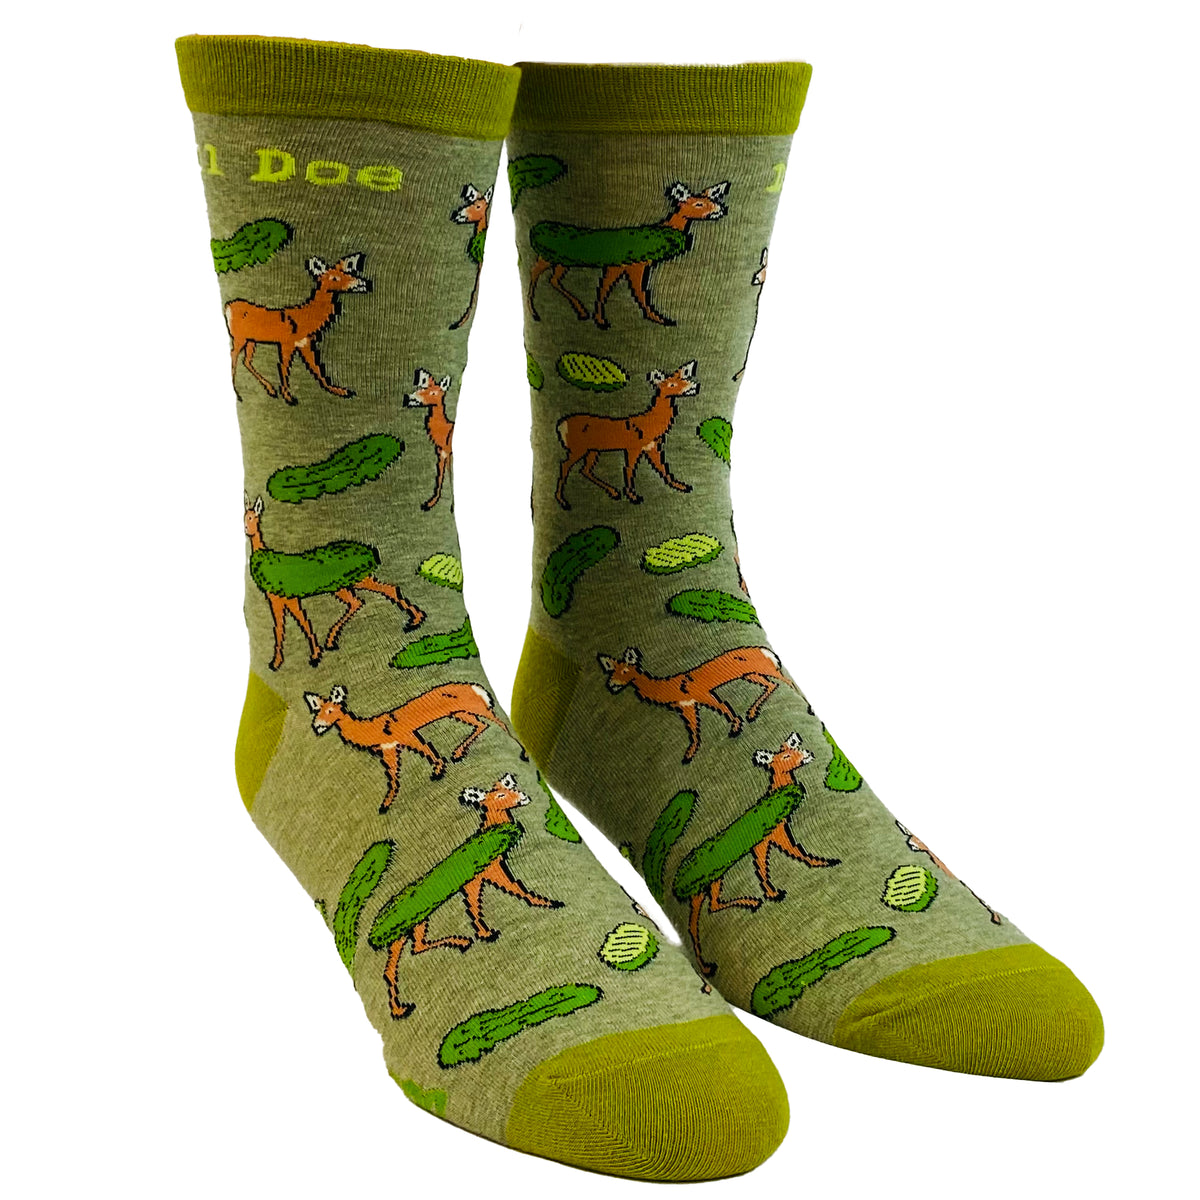 Funny Mens Socks Hilarious Guy Socks with Crazy Sarcastic Designs